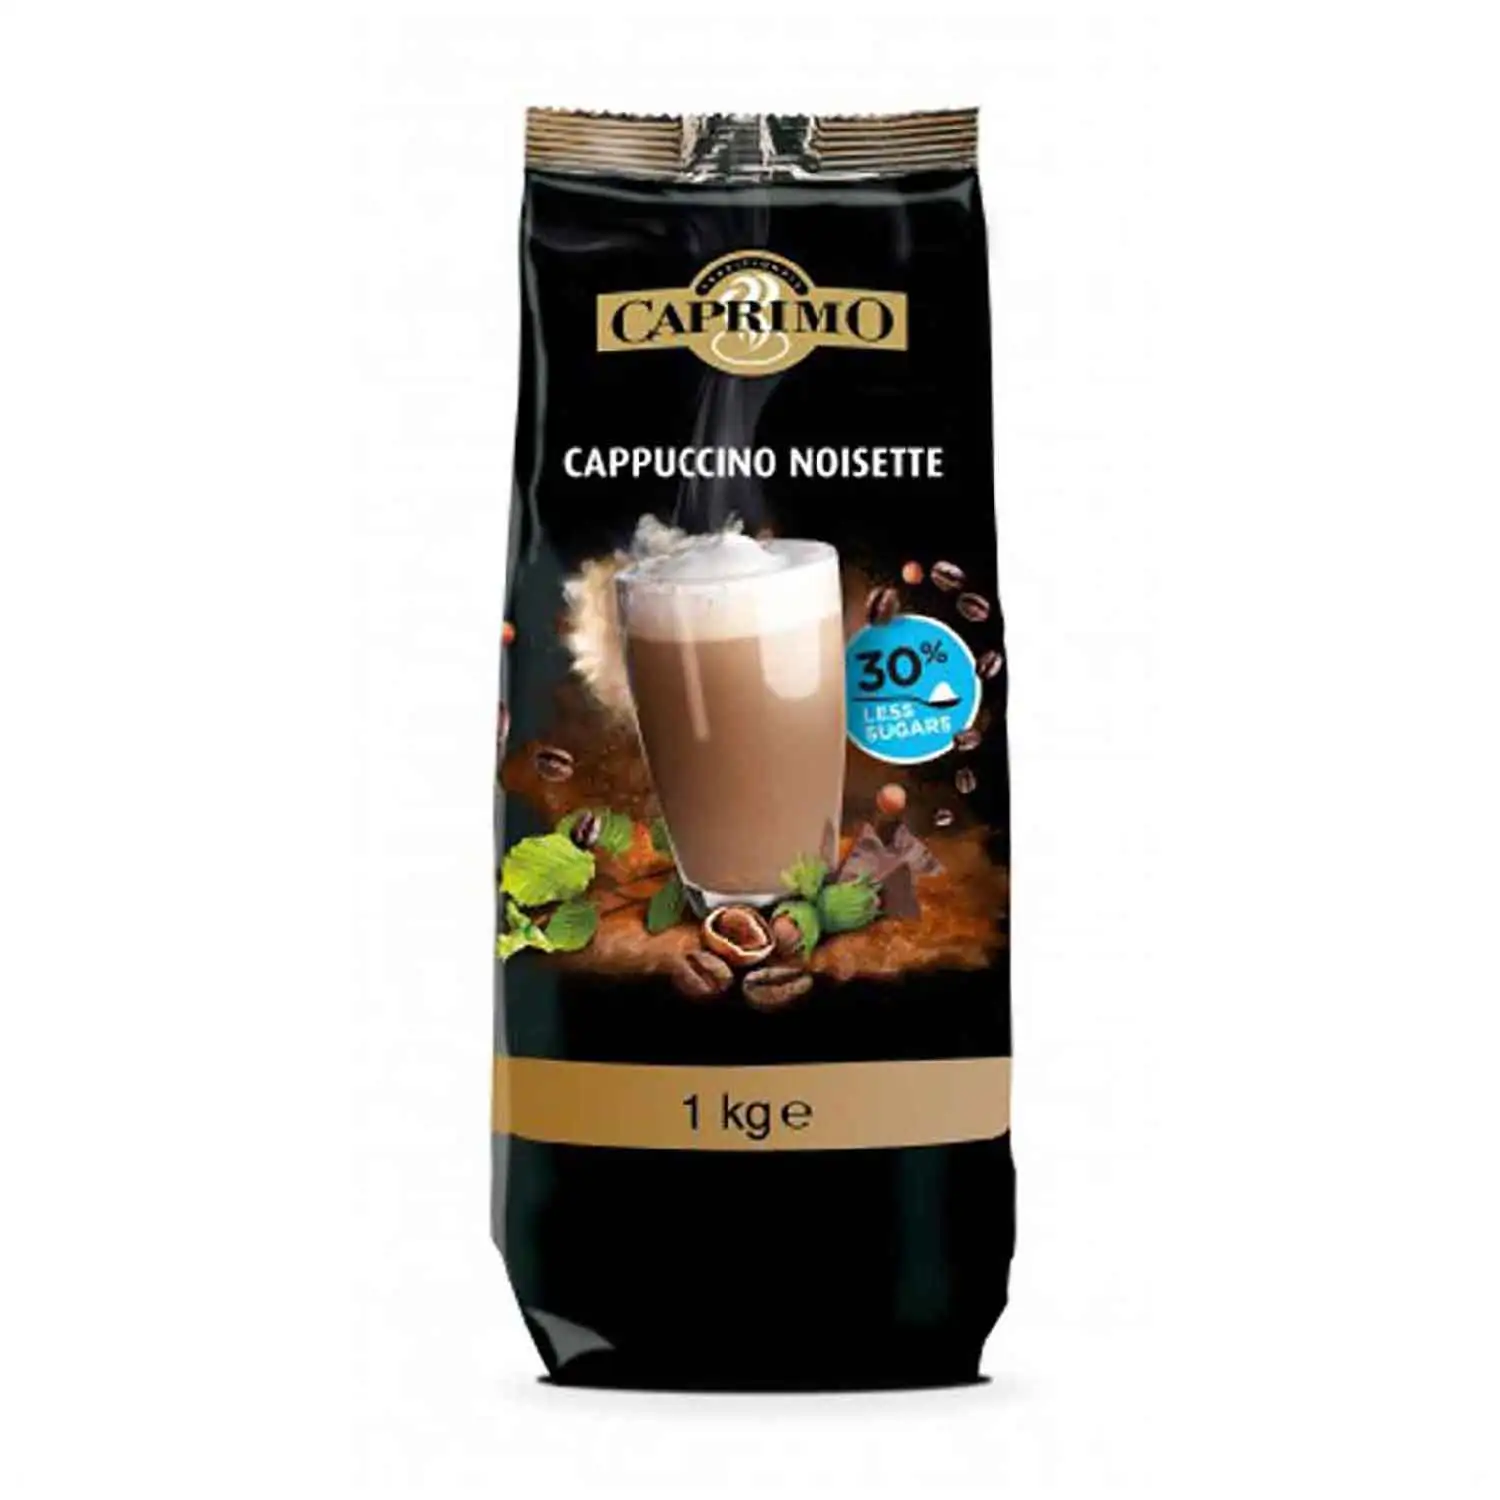 Caprimo cappuccino nois. moins sucre 1kg - Buy at Real Tobacco